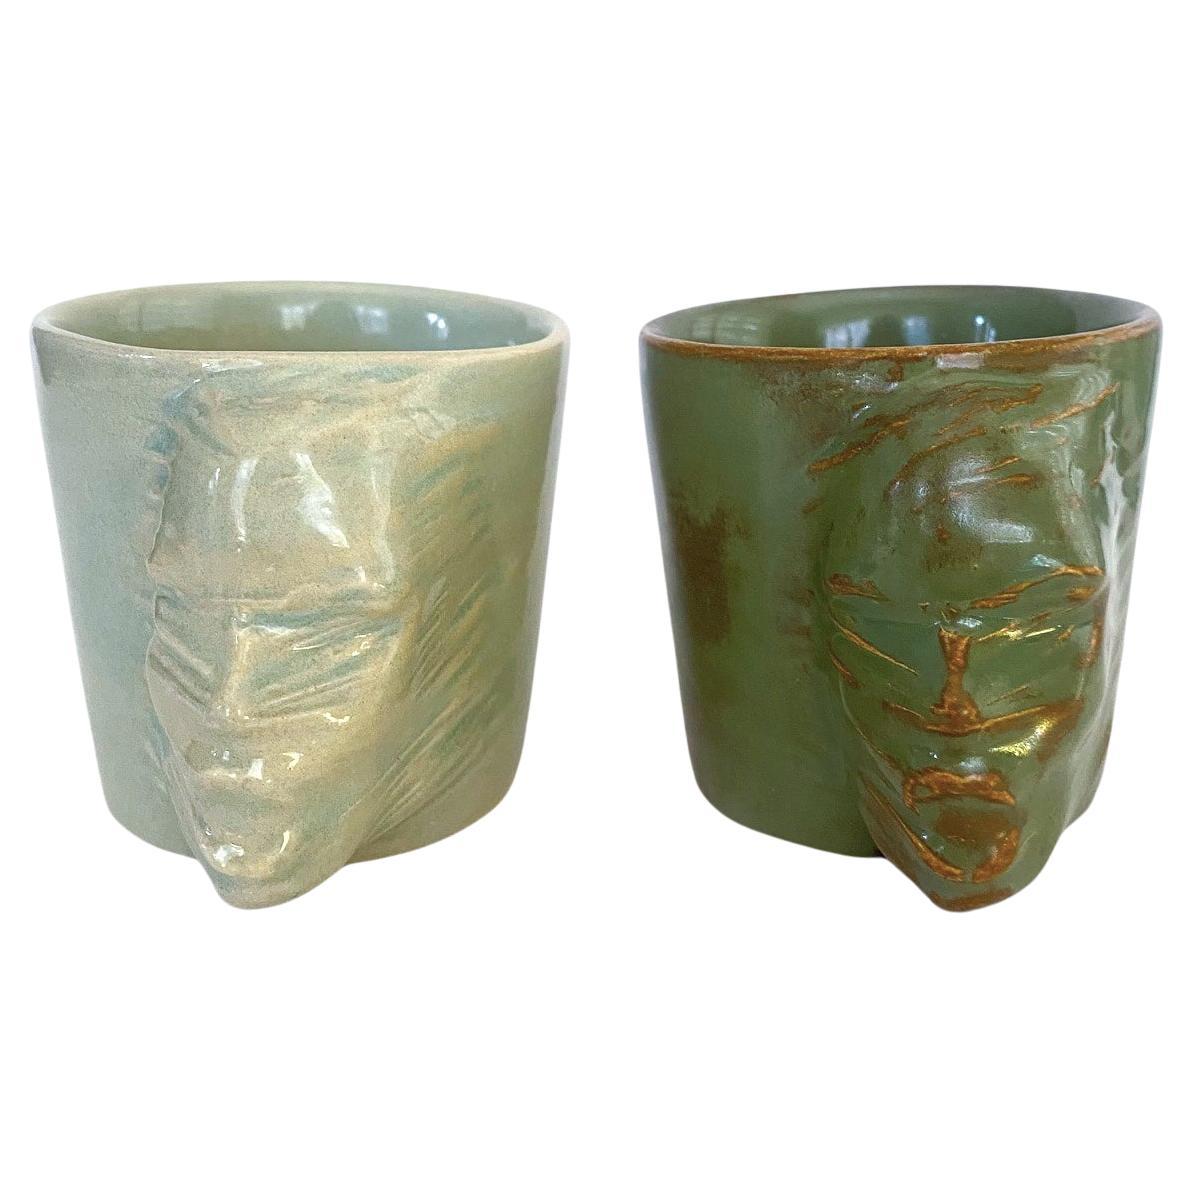 Sculptural Ceramic Cups Set of 2 by Hulya Sozer, Face Silhouette, Earthly Greens